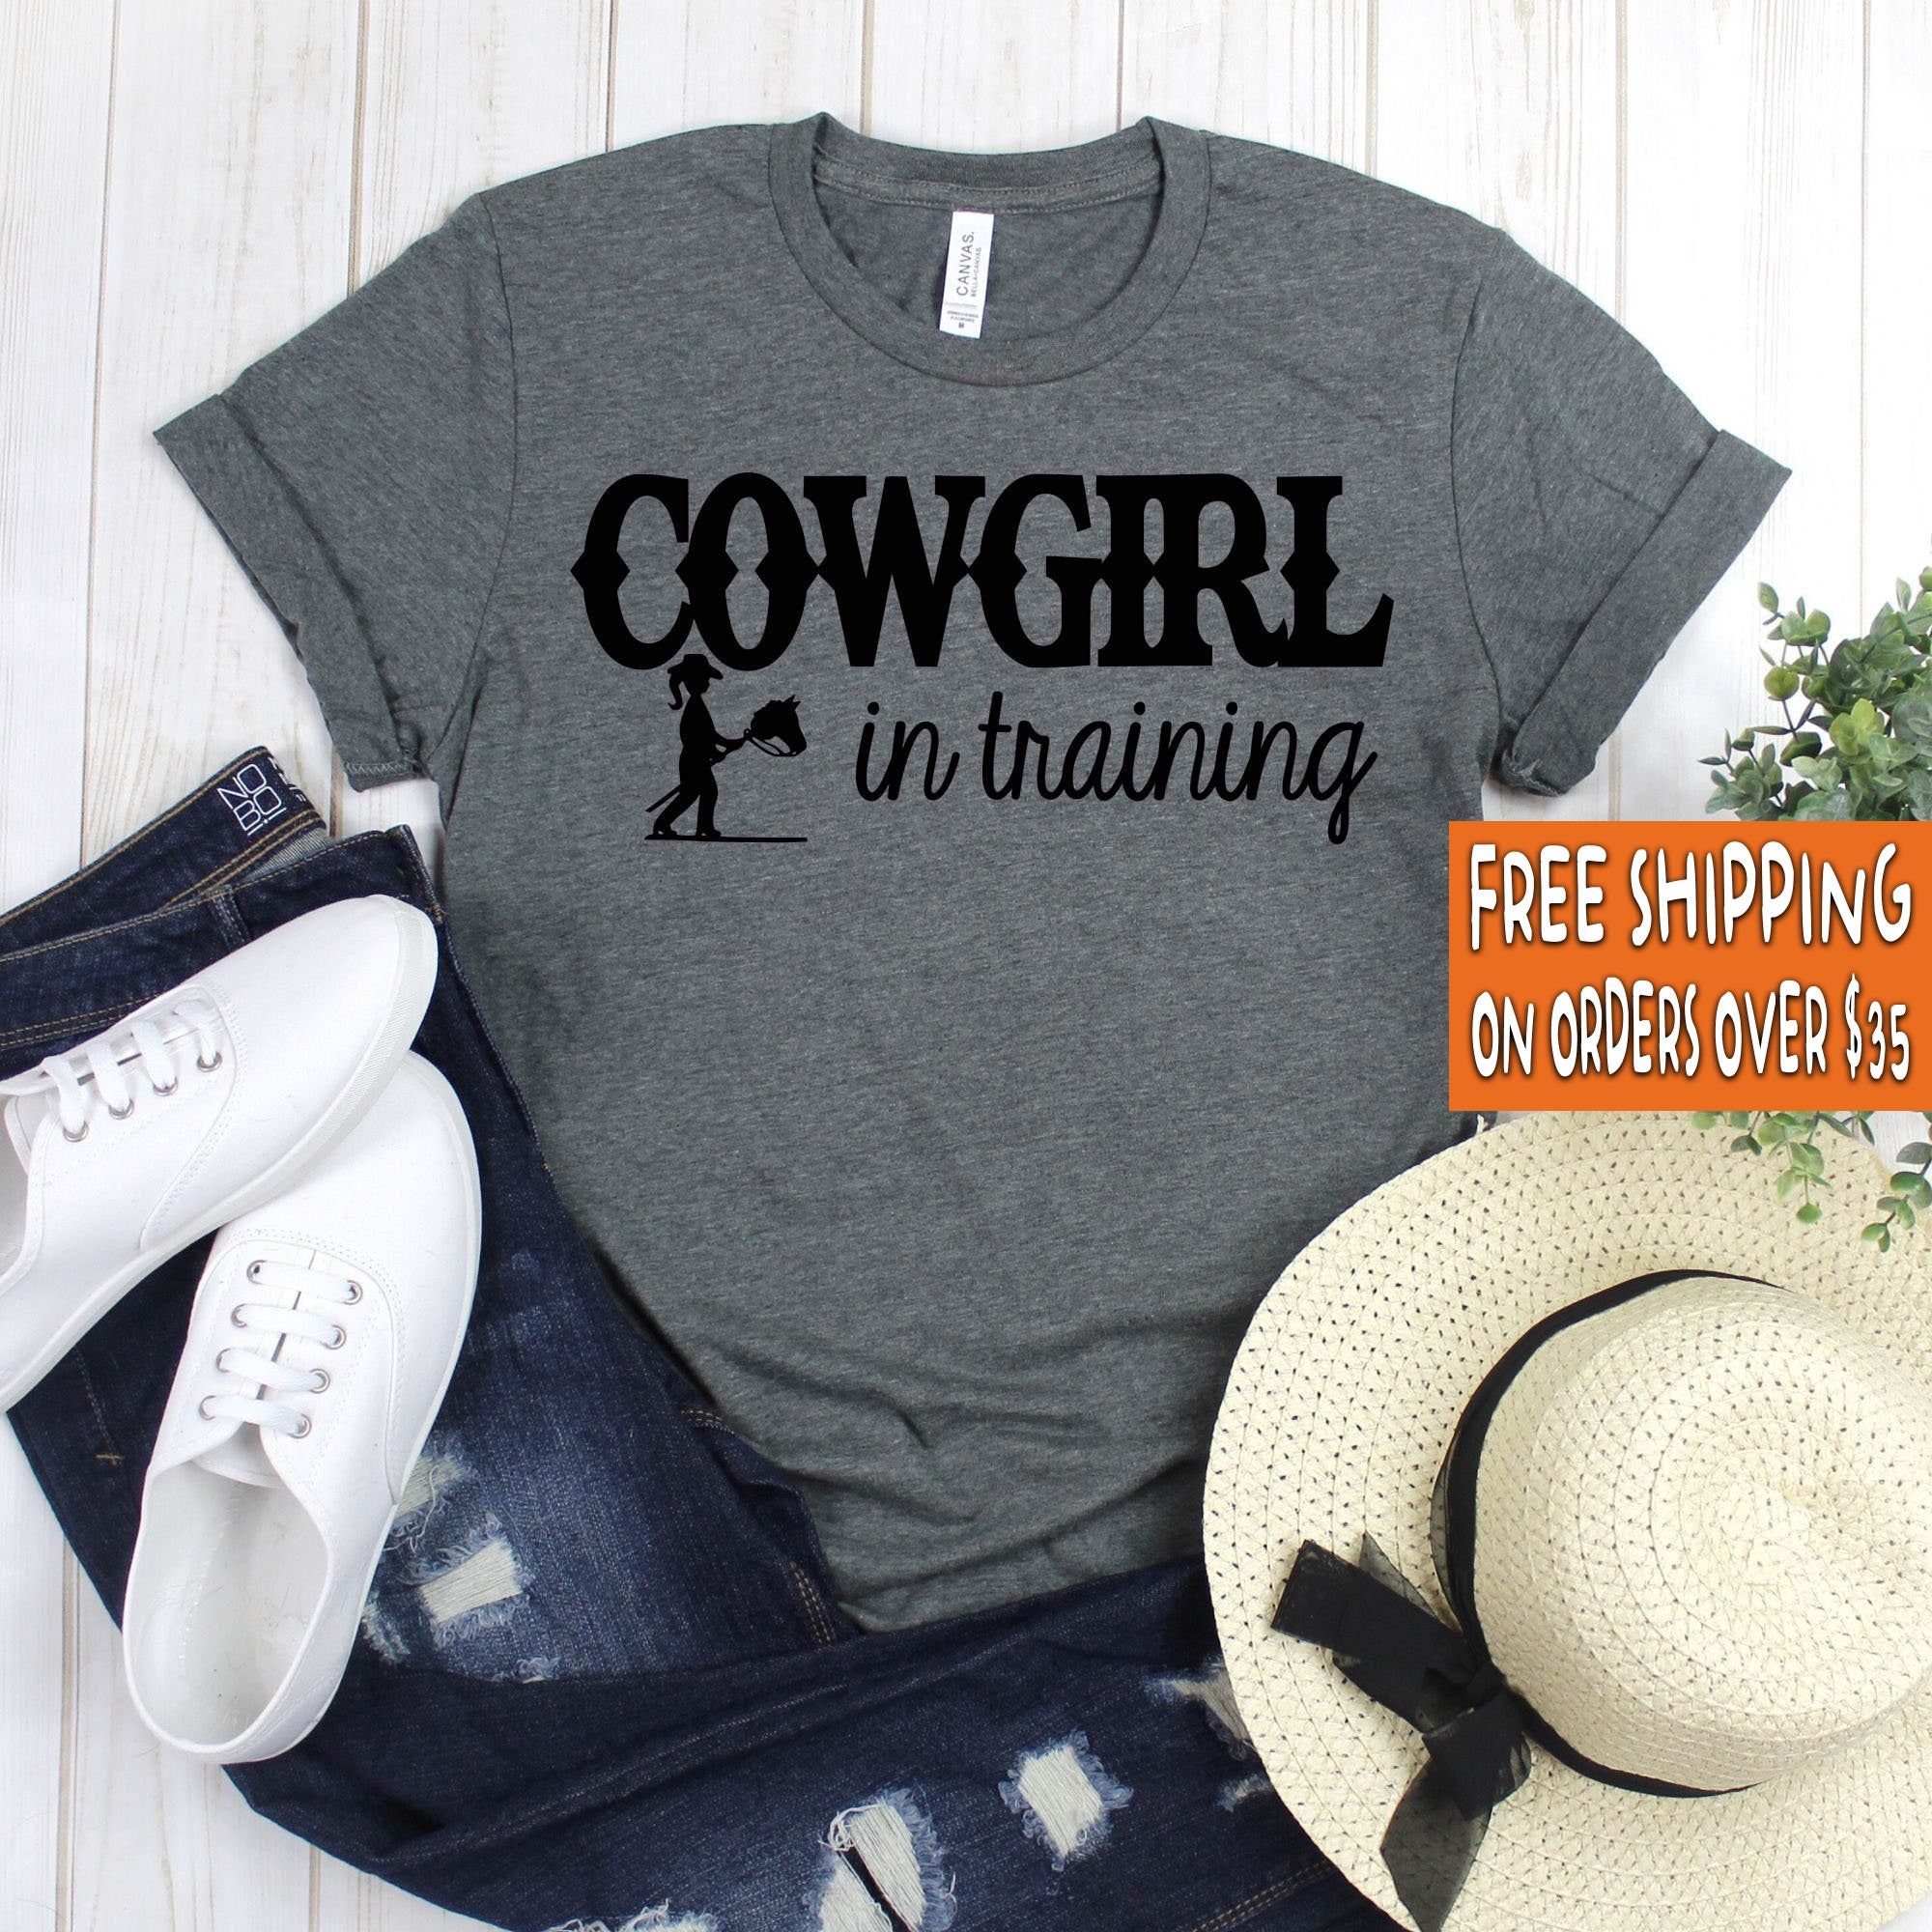 Girls Rodeo Shirt Cowgirl in Training Western Shirt Rodeo | Etsy